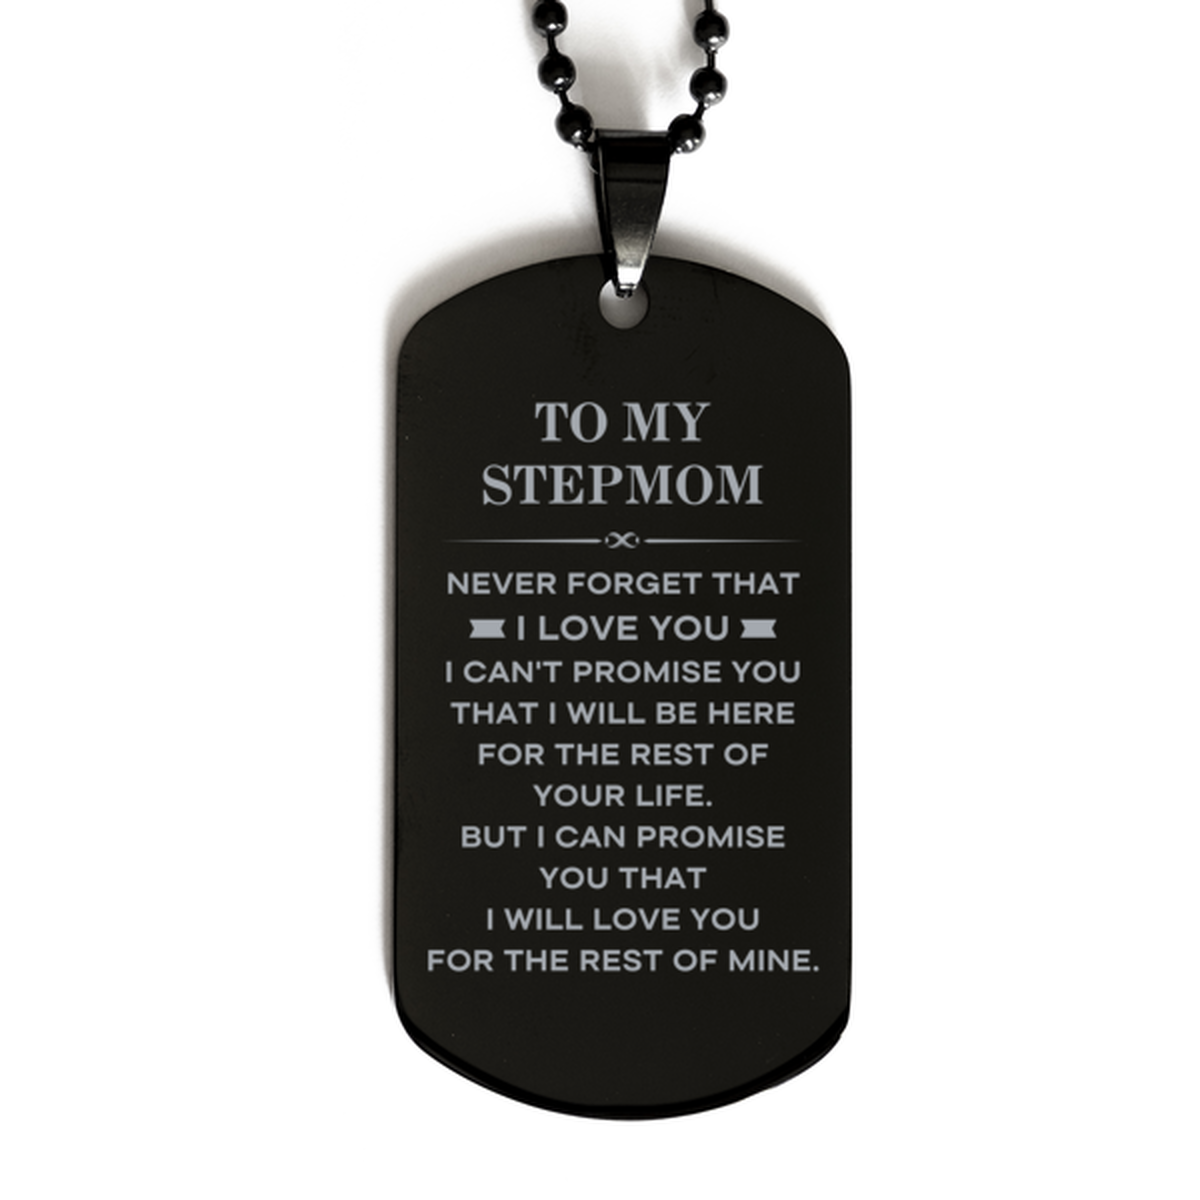 To My Stepmom Gifts, I will love you for the rest of mine, Love Stepmom Dog Tag Necklace, Birthday Christmas Unique Black Dog Tag For Stepmom